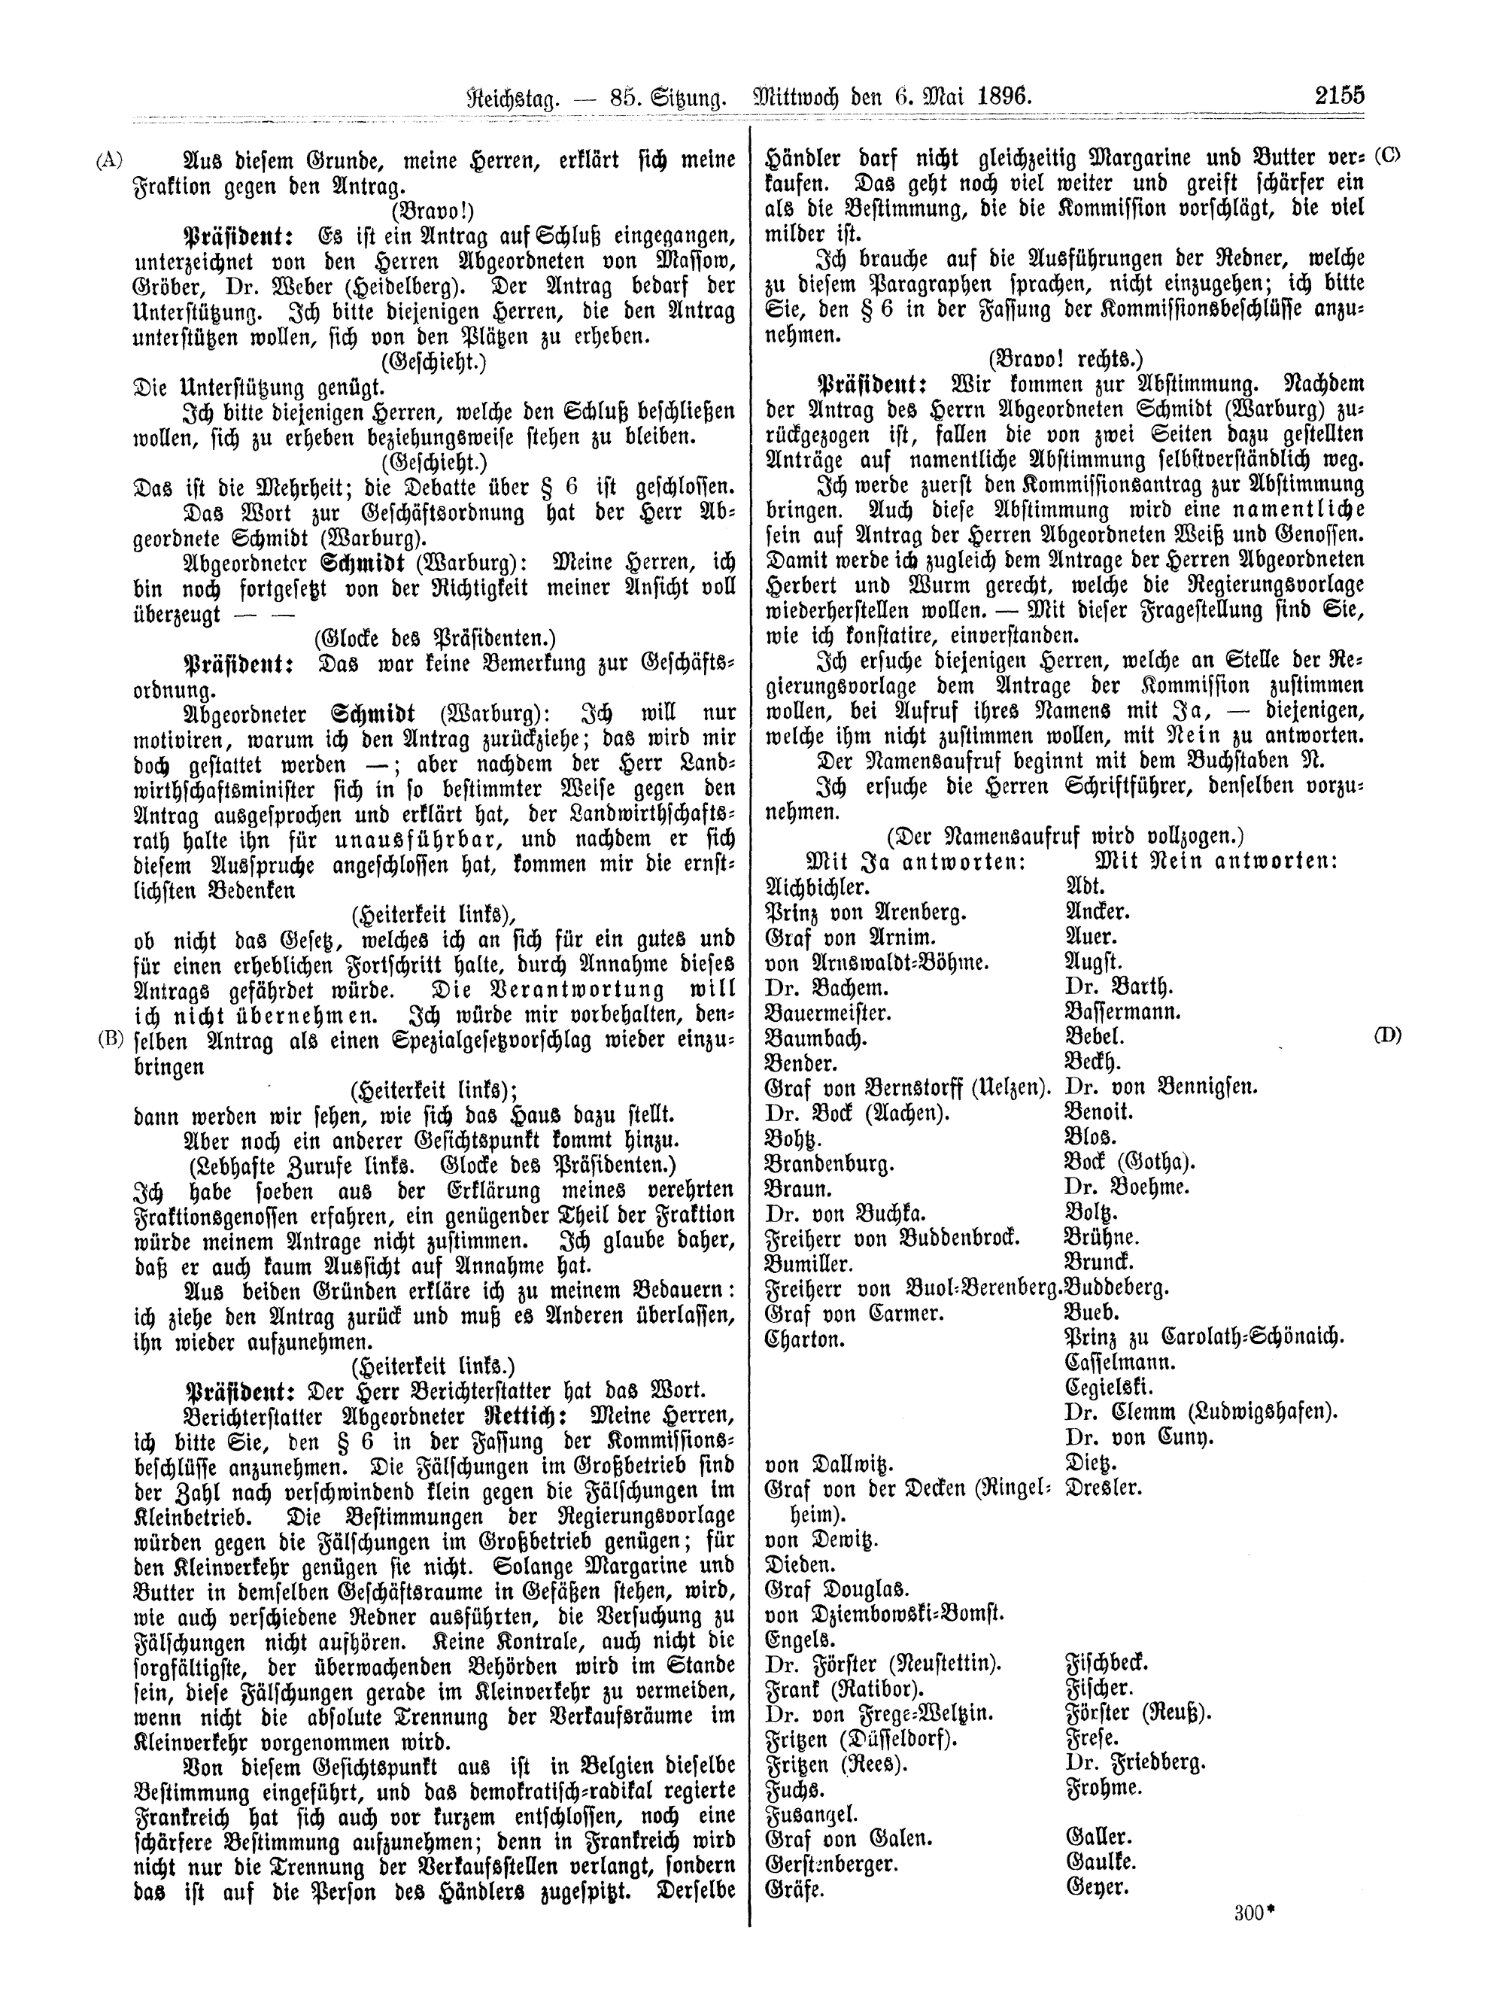 Scan of page 2155